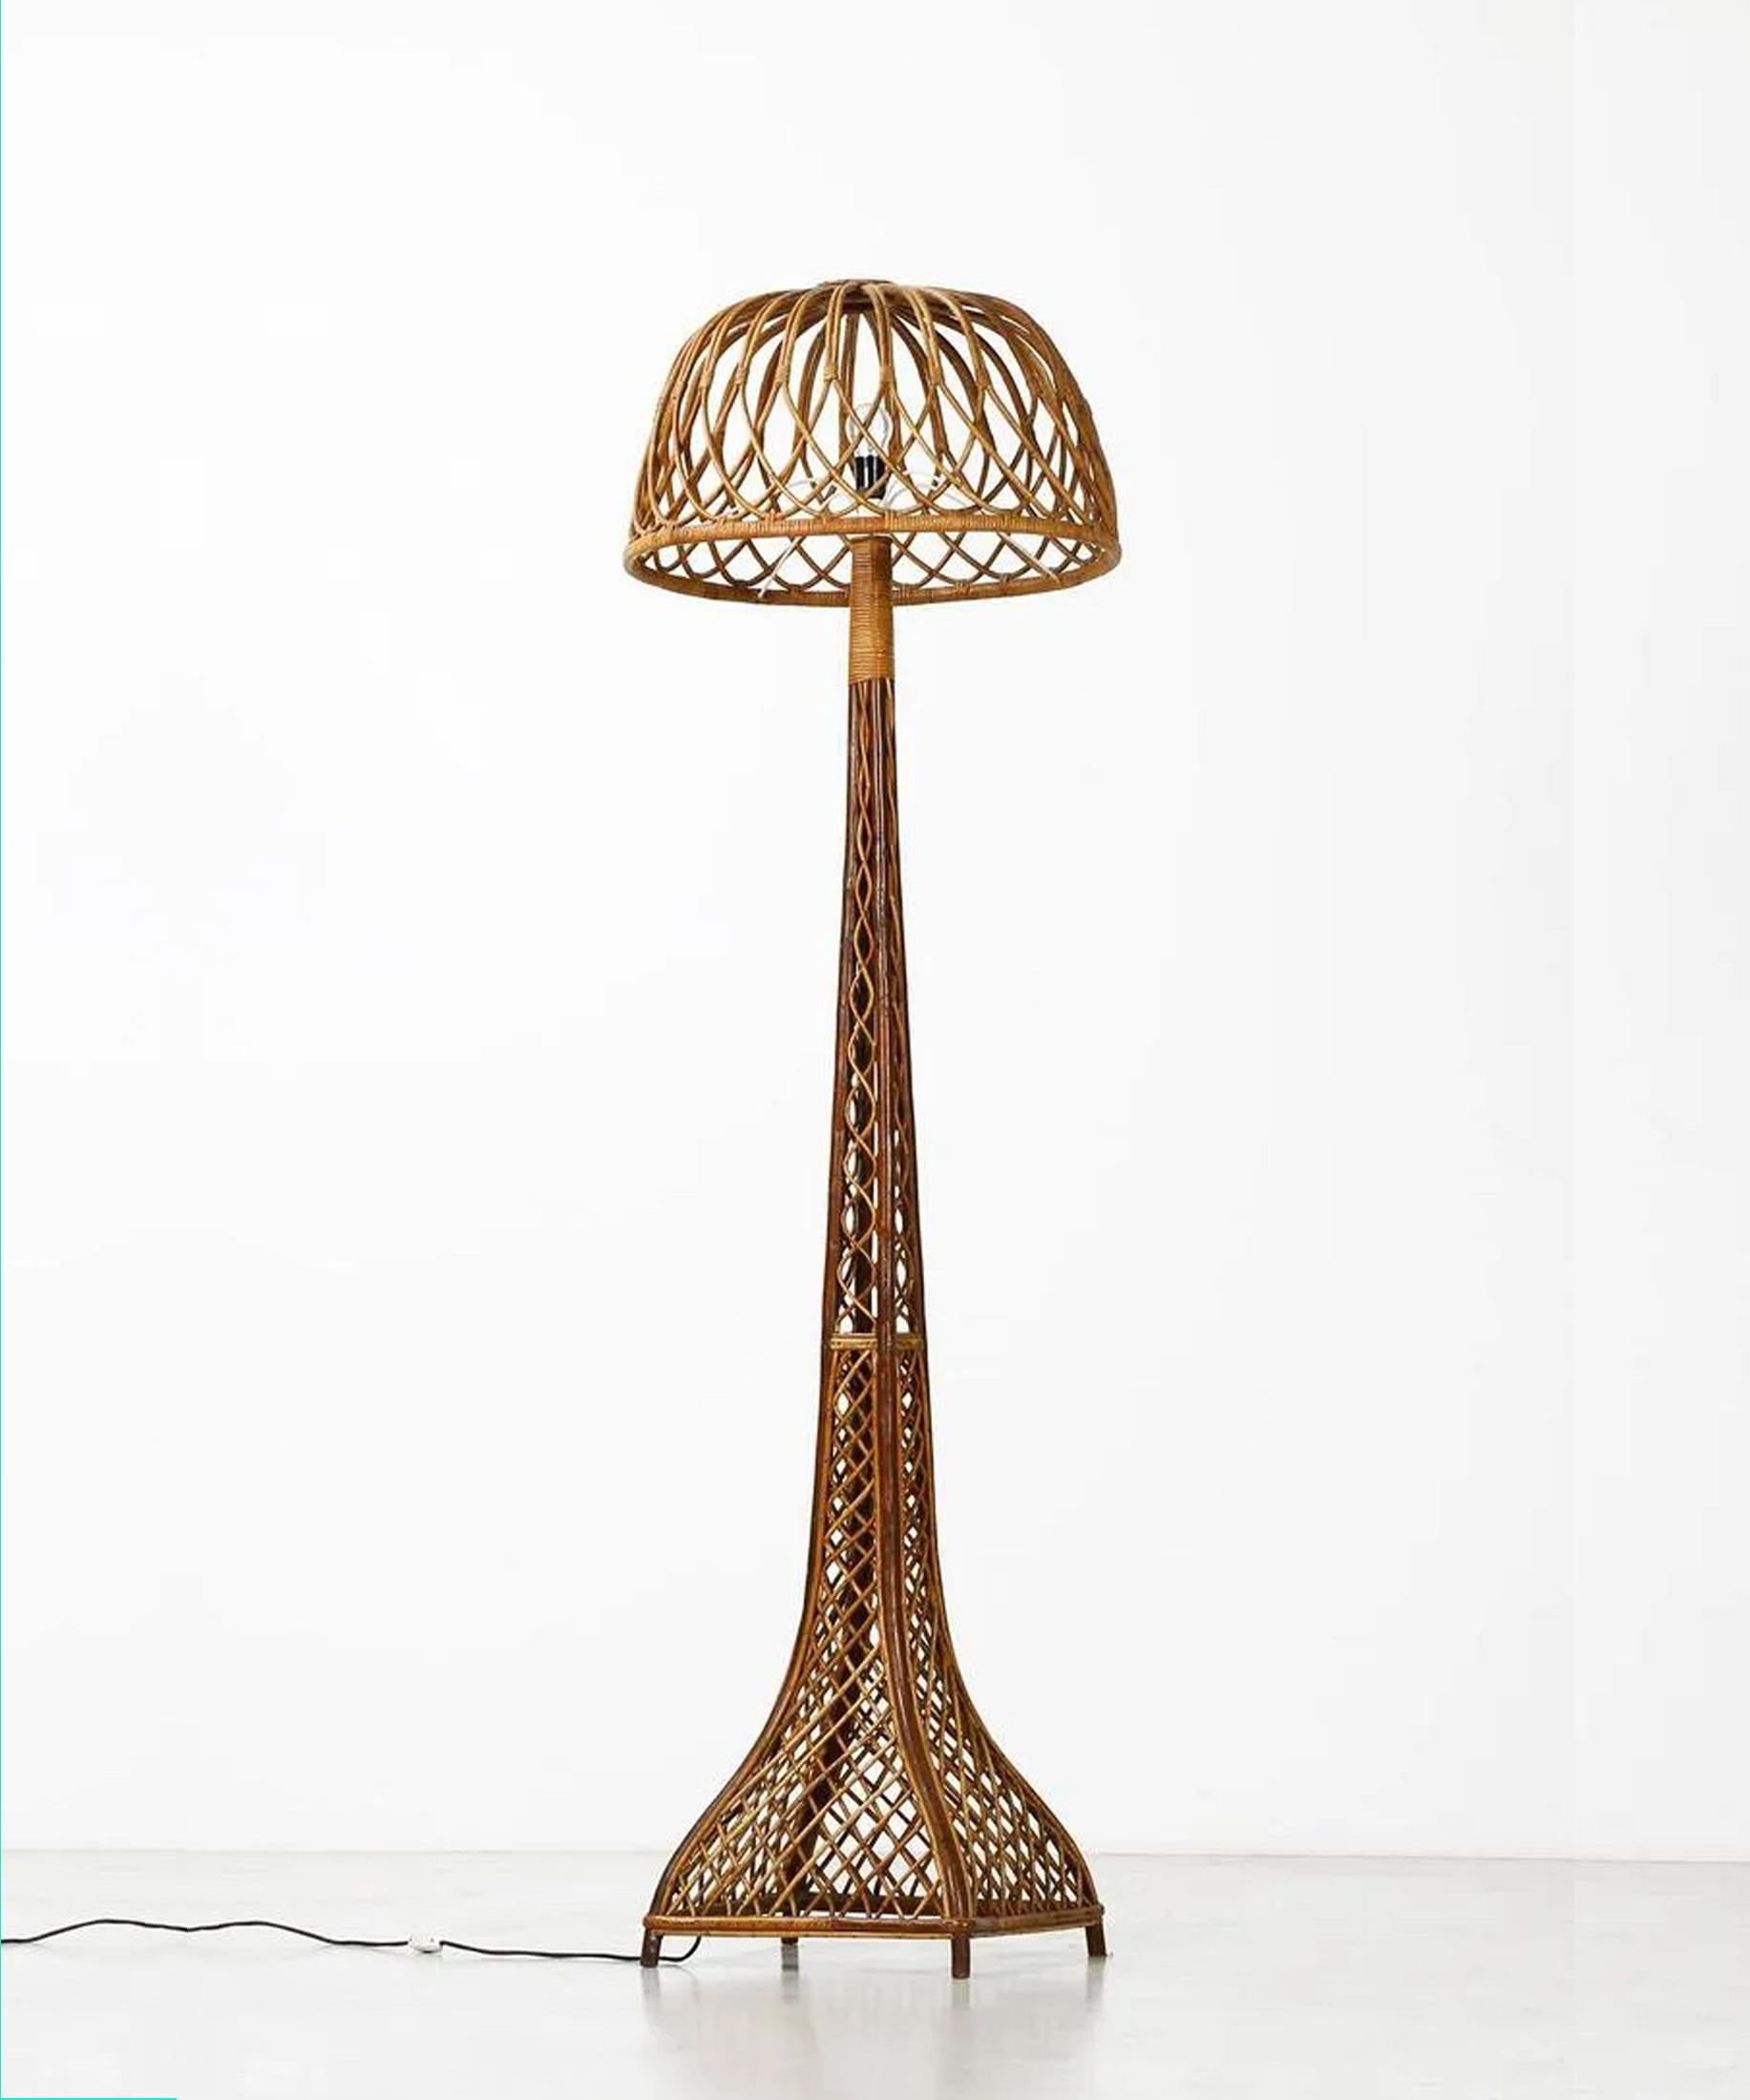 Very tall and stylish Italian rattan floor lamp. This rattan is skillfully crafted and woven with a dynamic criss cross pattern. The fluid lines give this lamp great visual interest and an open, welcoming character. The base's substantial footprint